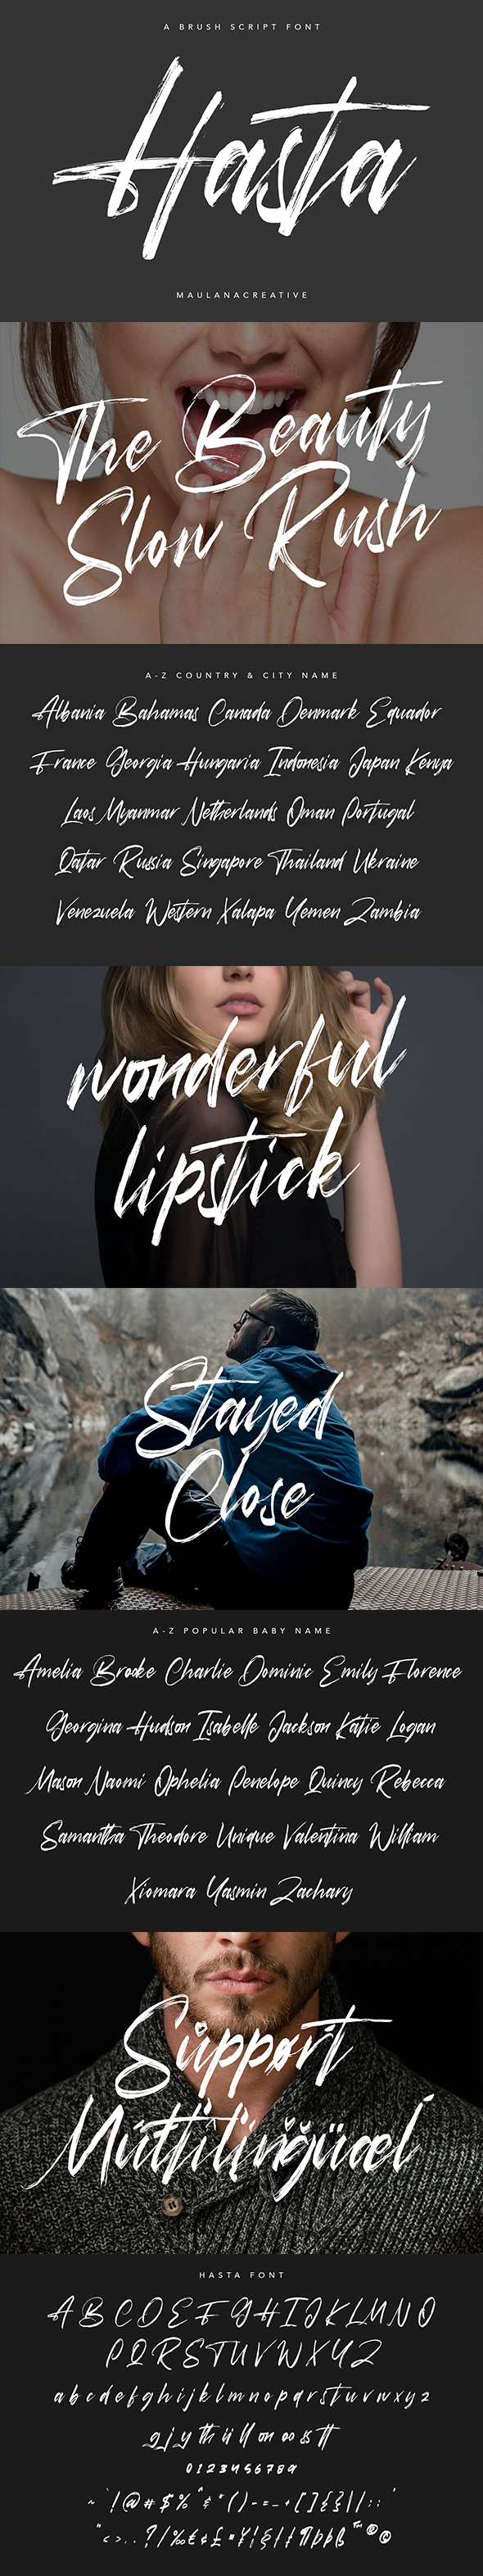 Download Free Handwritten Script Fonts From Graphicriver PSD Mockup Template